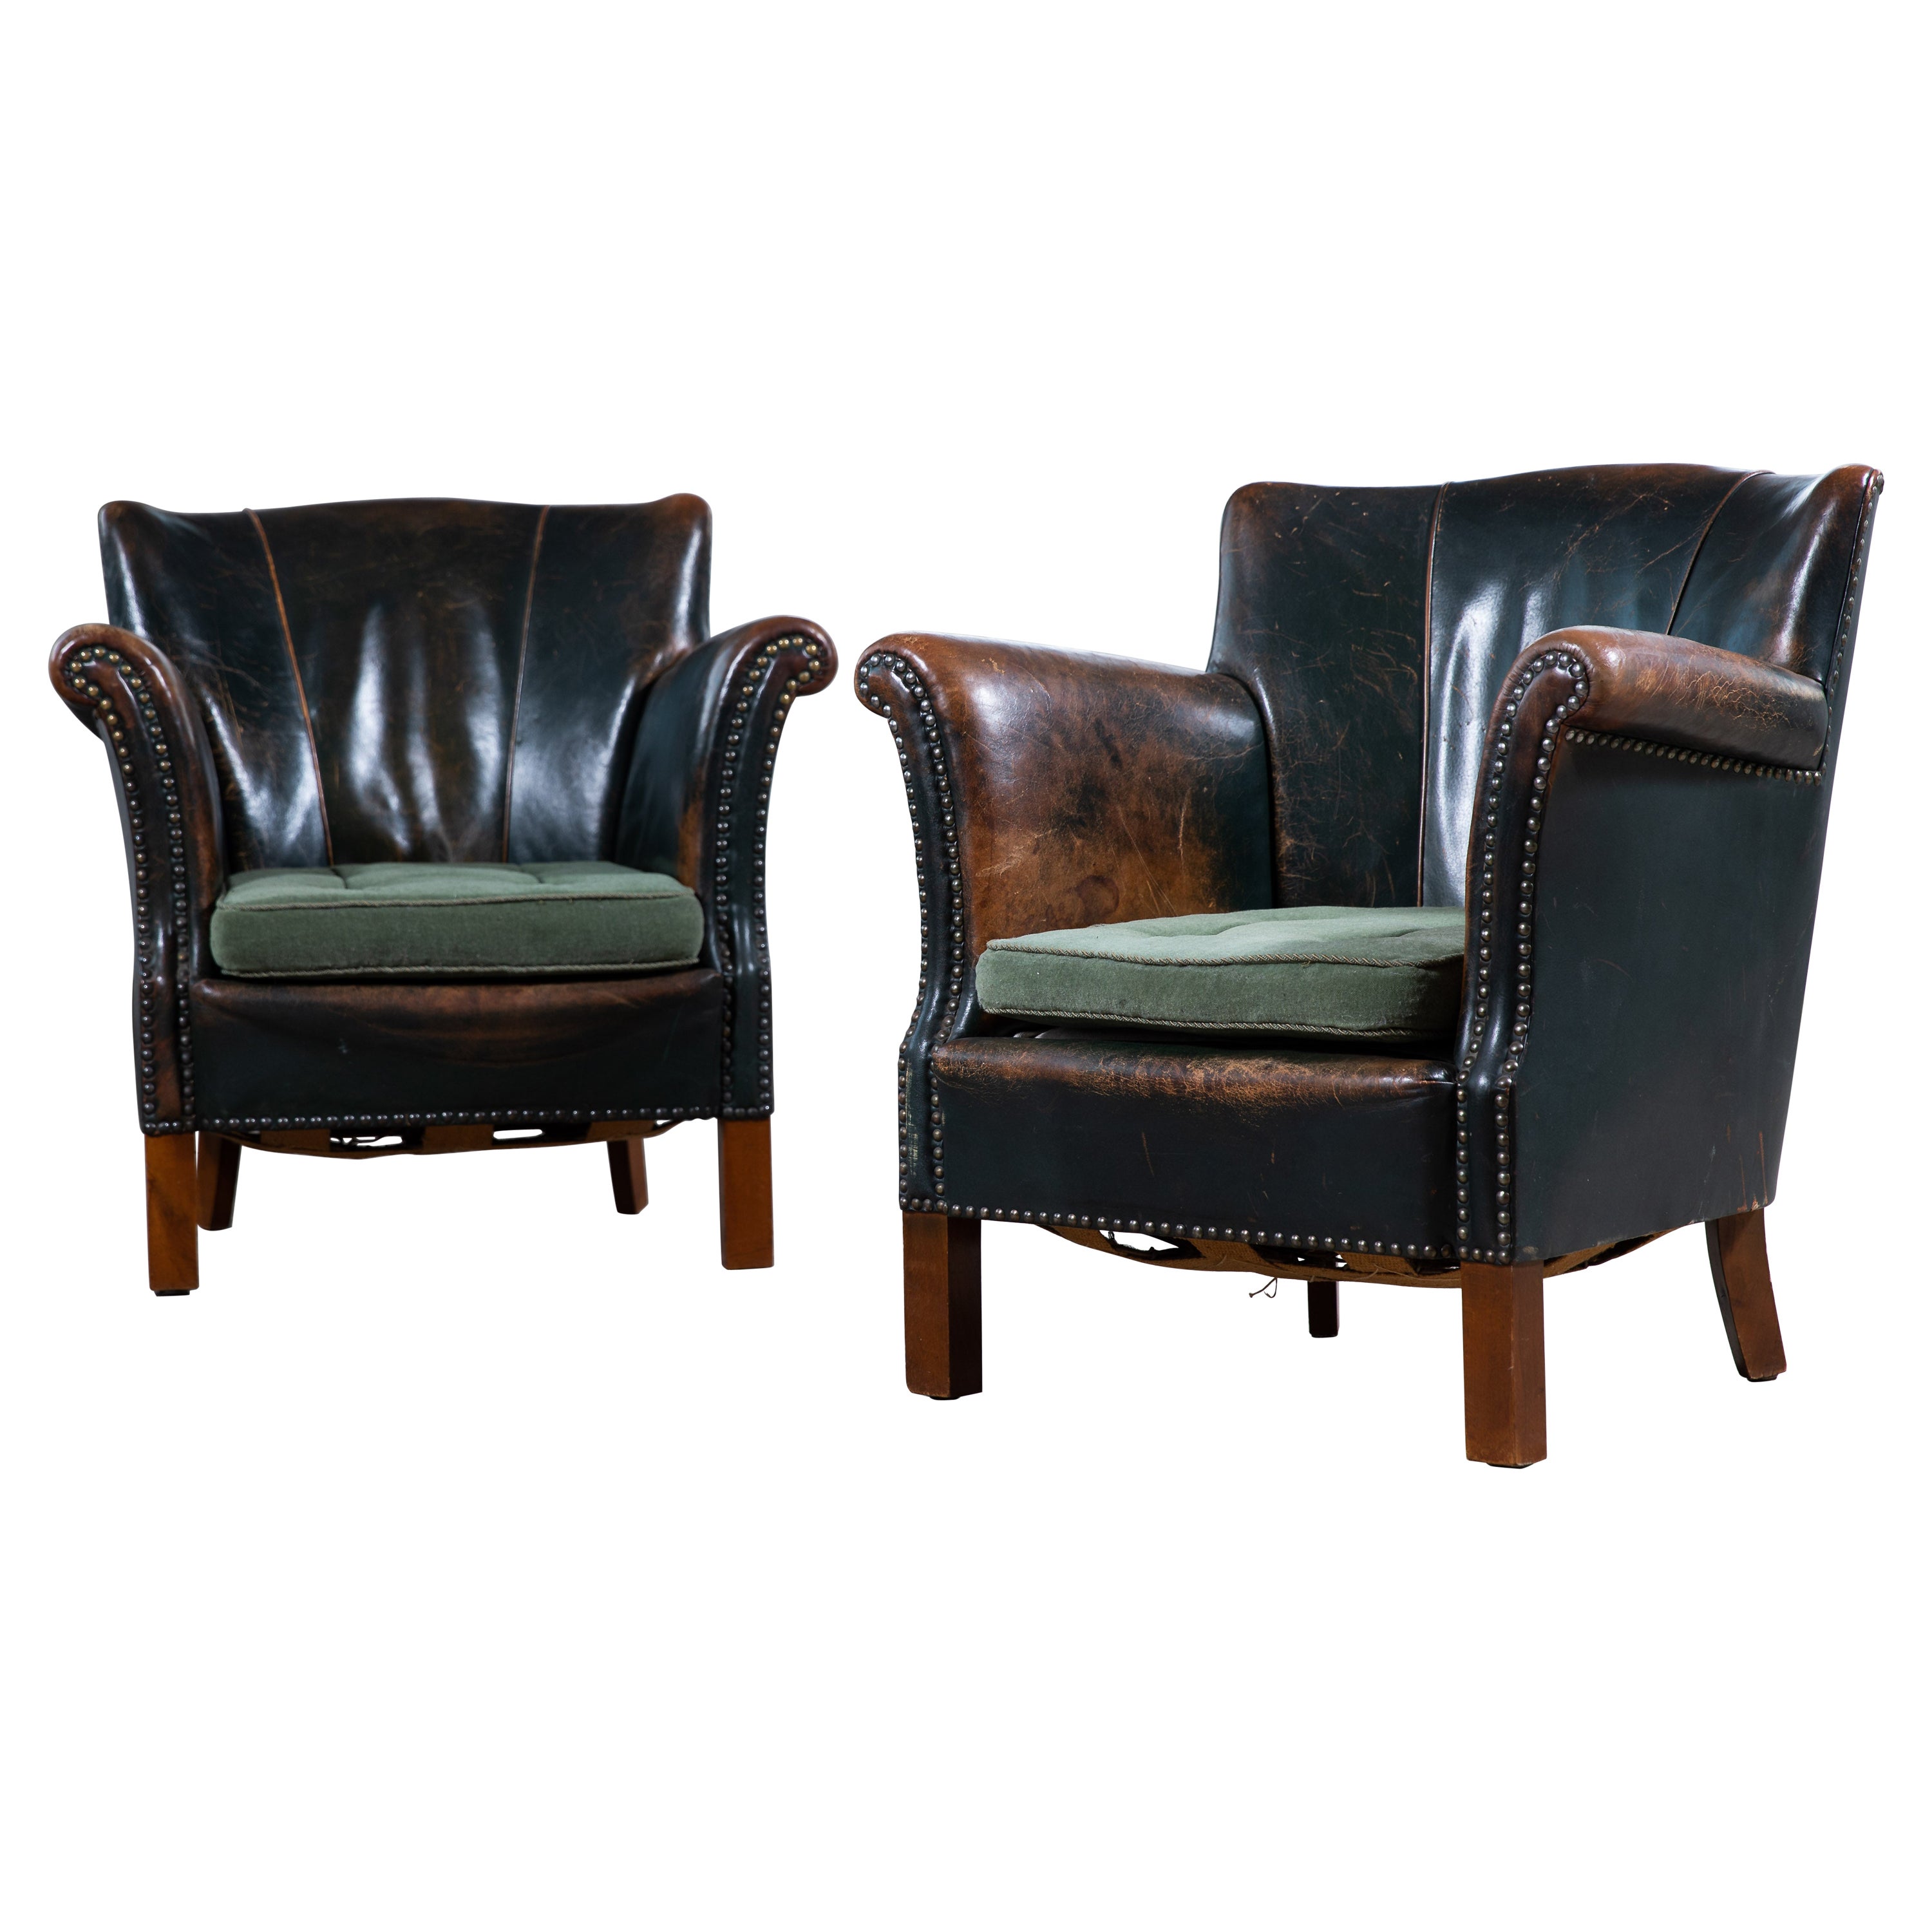 Pair of 1930-40's Classic Danish Club Chairs in Green Patinated Leather